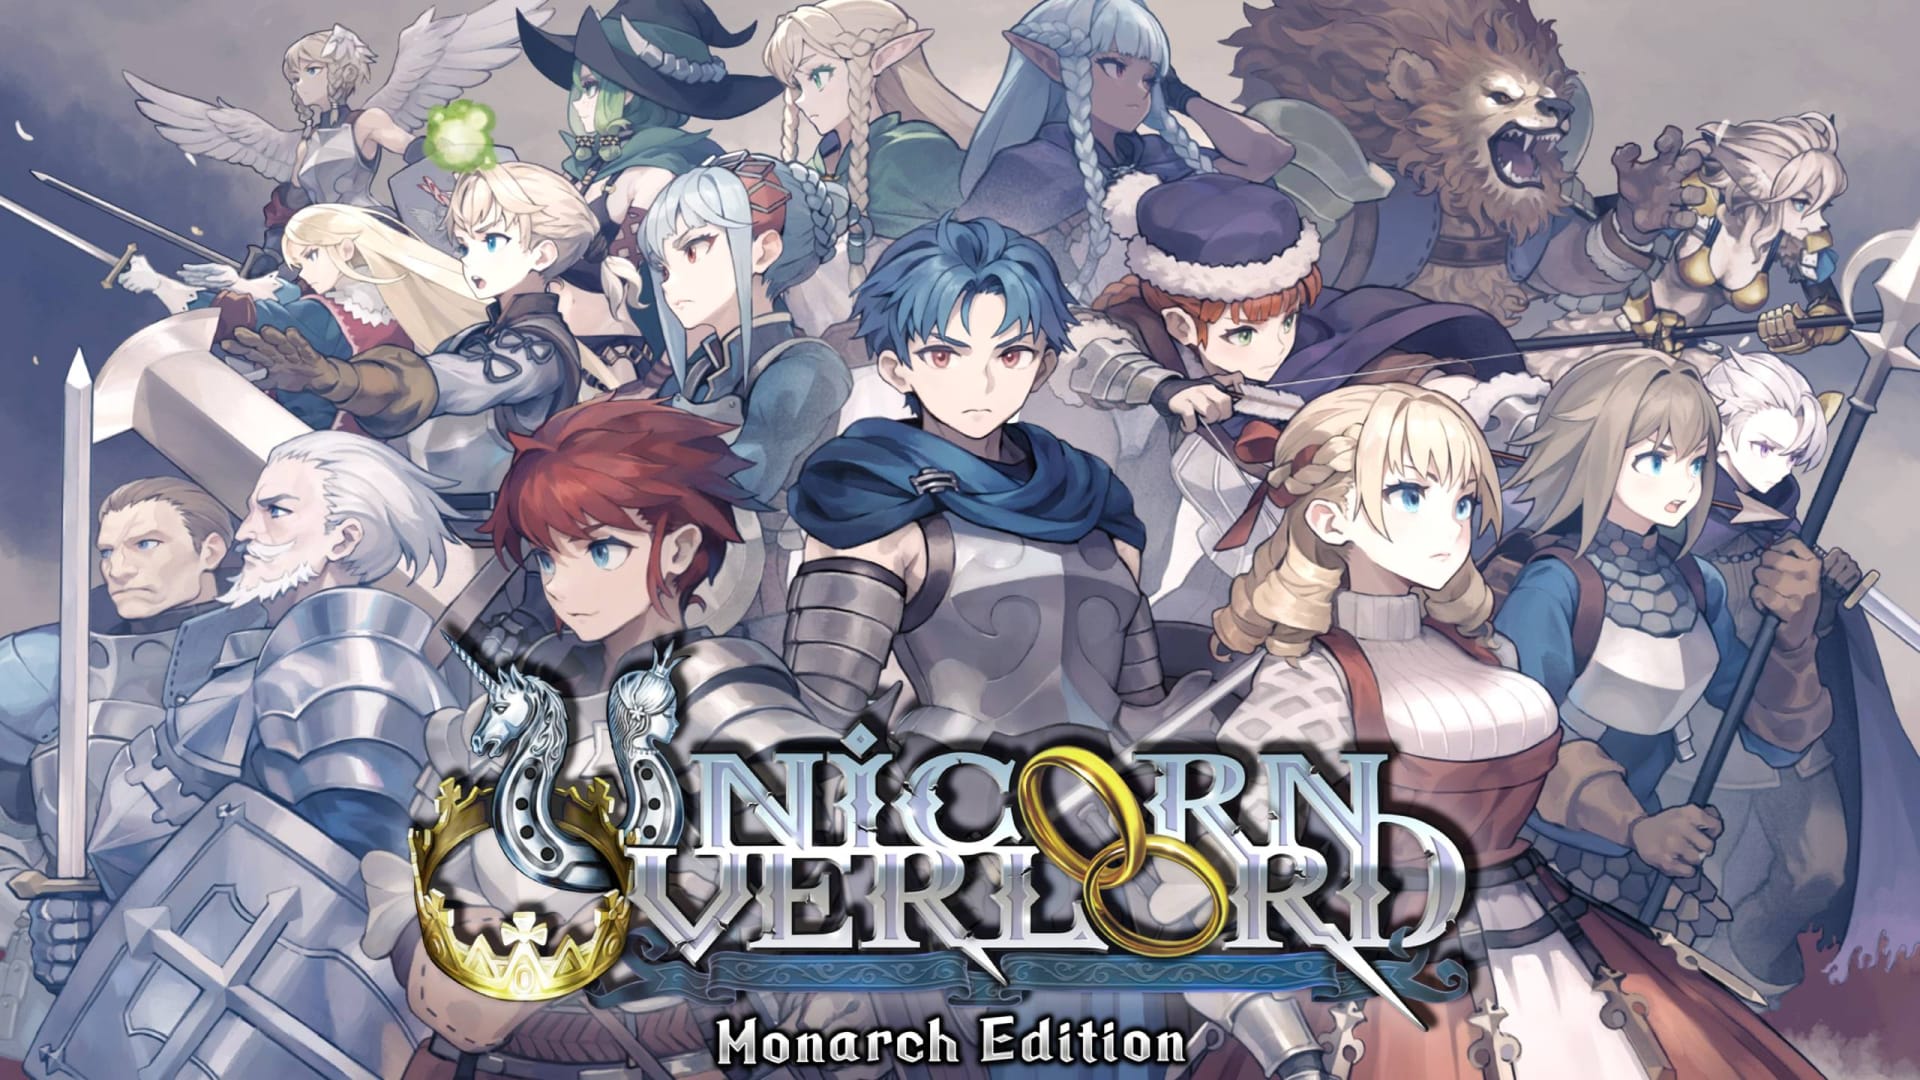 Unicorn Overlord by Vanillaware Has Sold 500,000 Copies